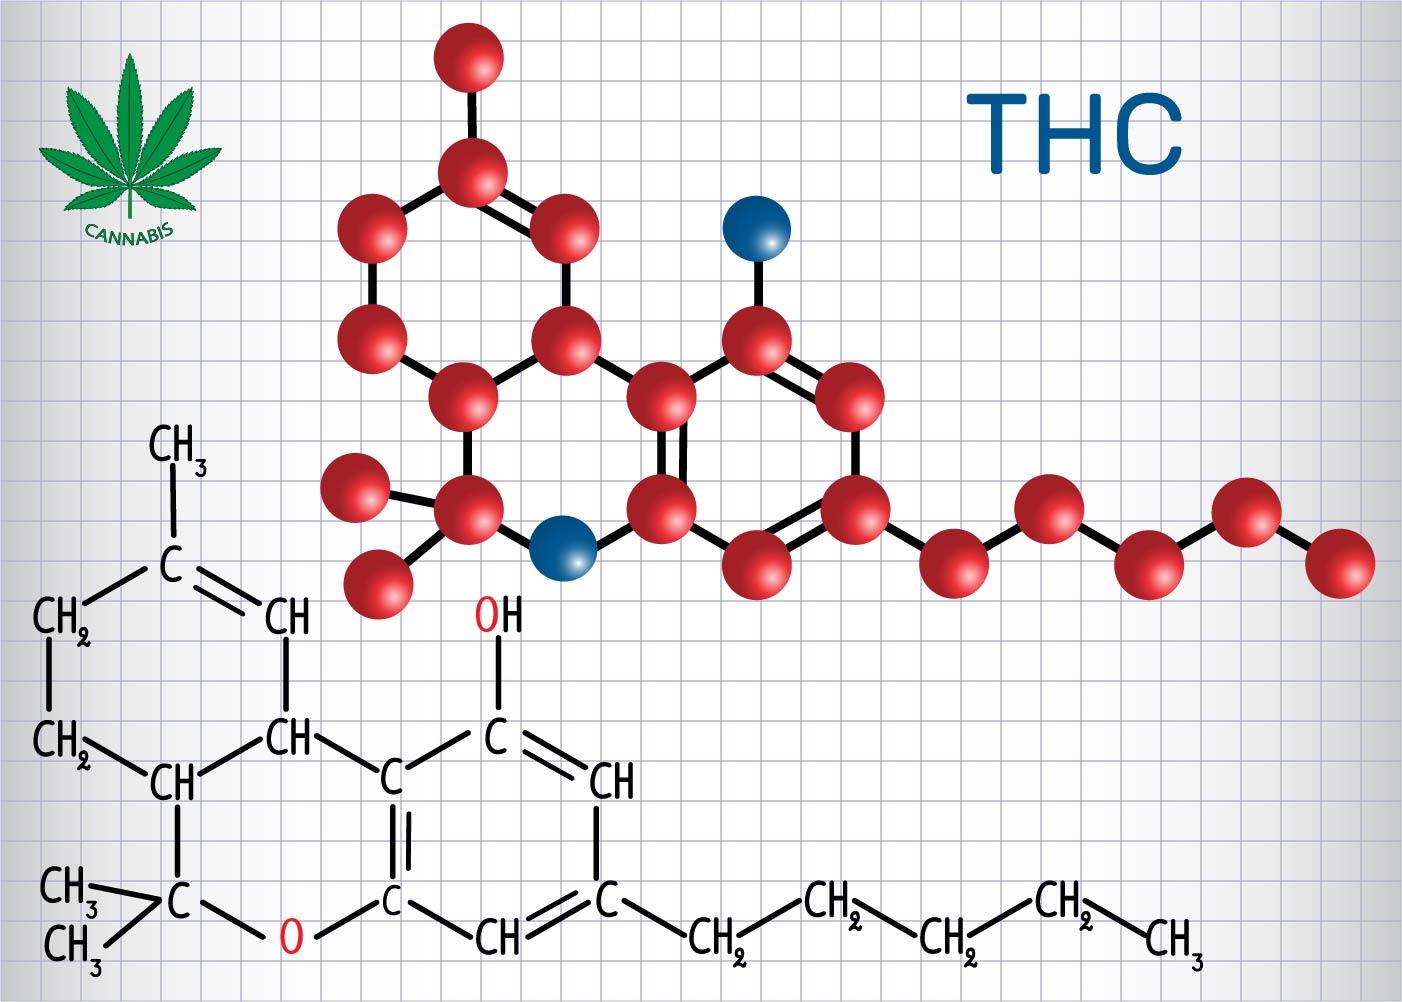 Marinol is not as good as weed, even though it contains synthesized THC.